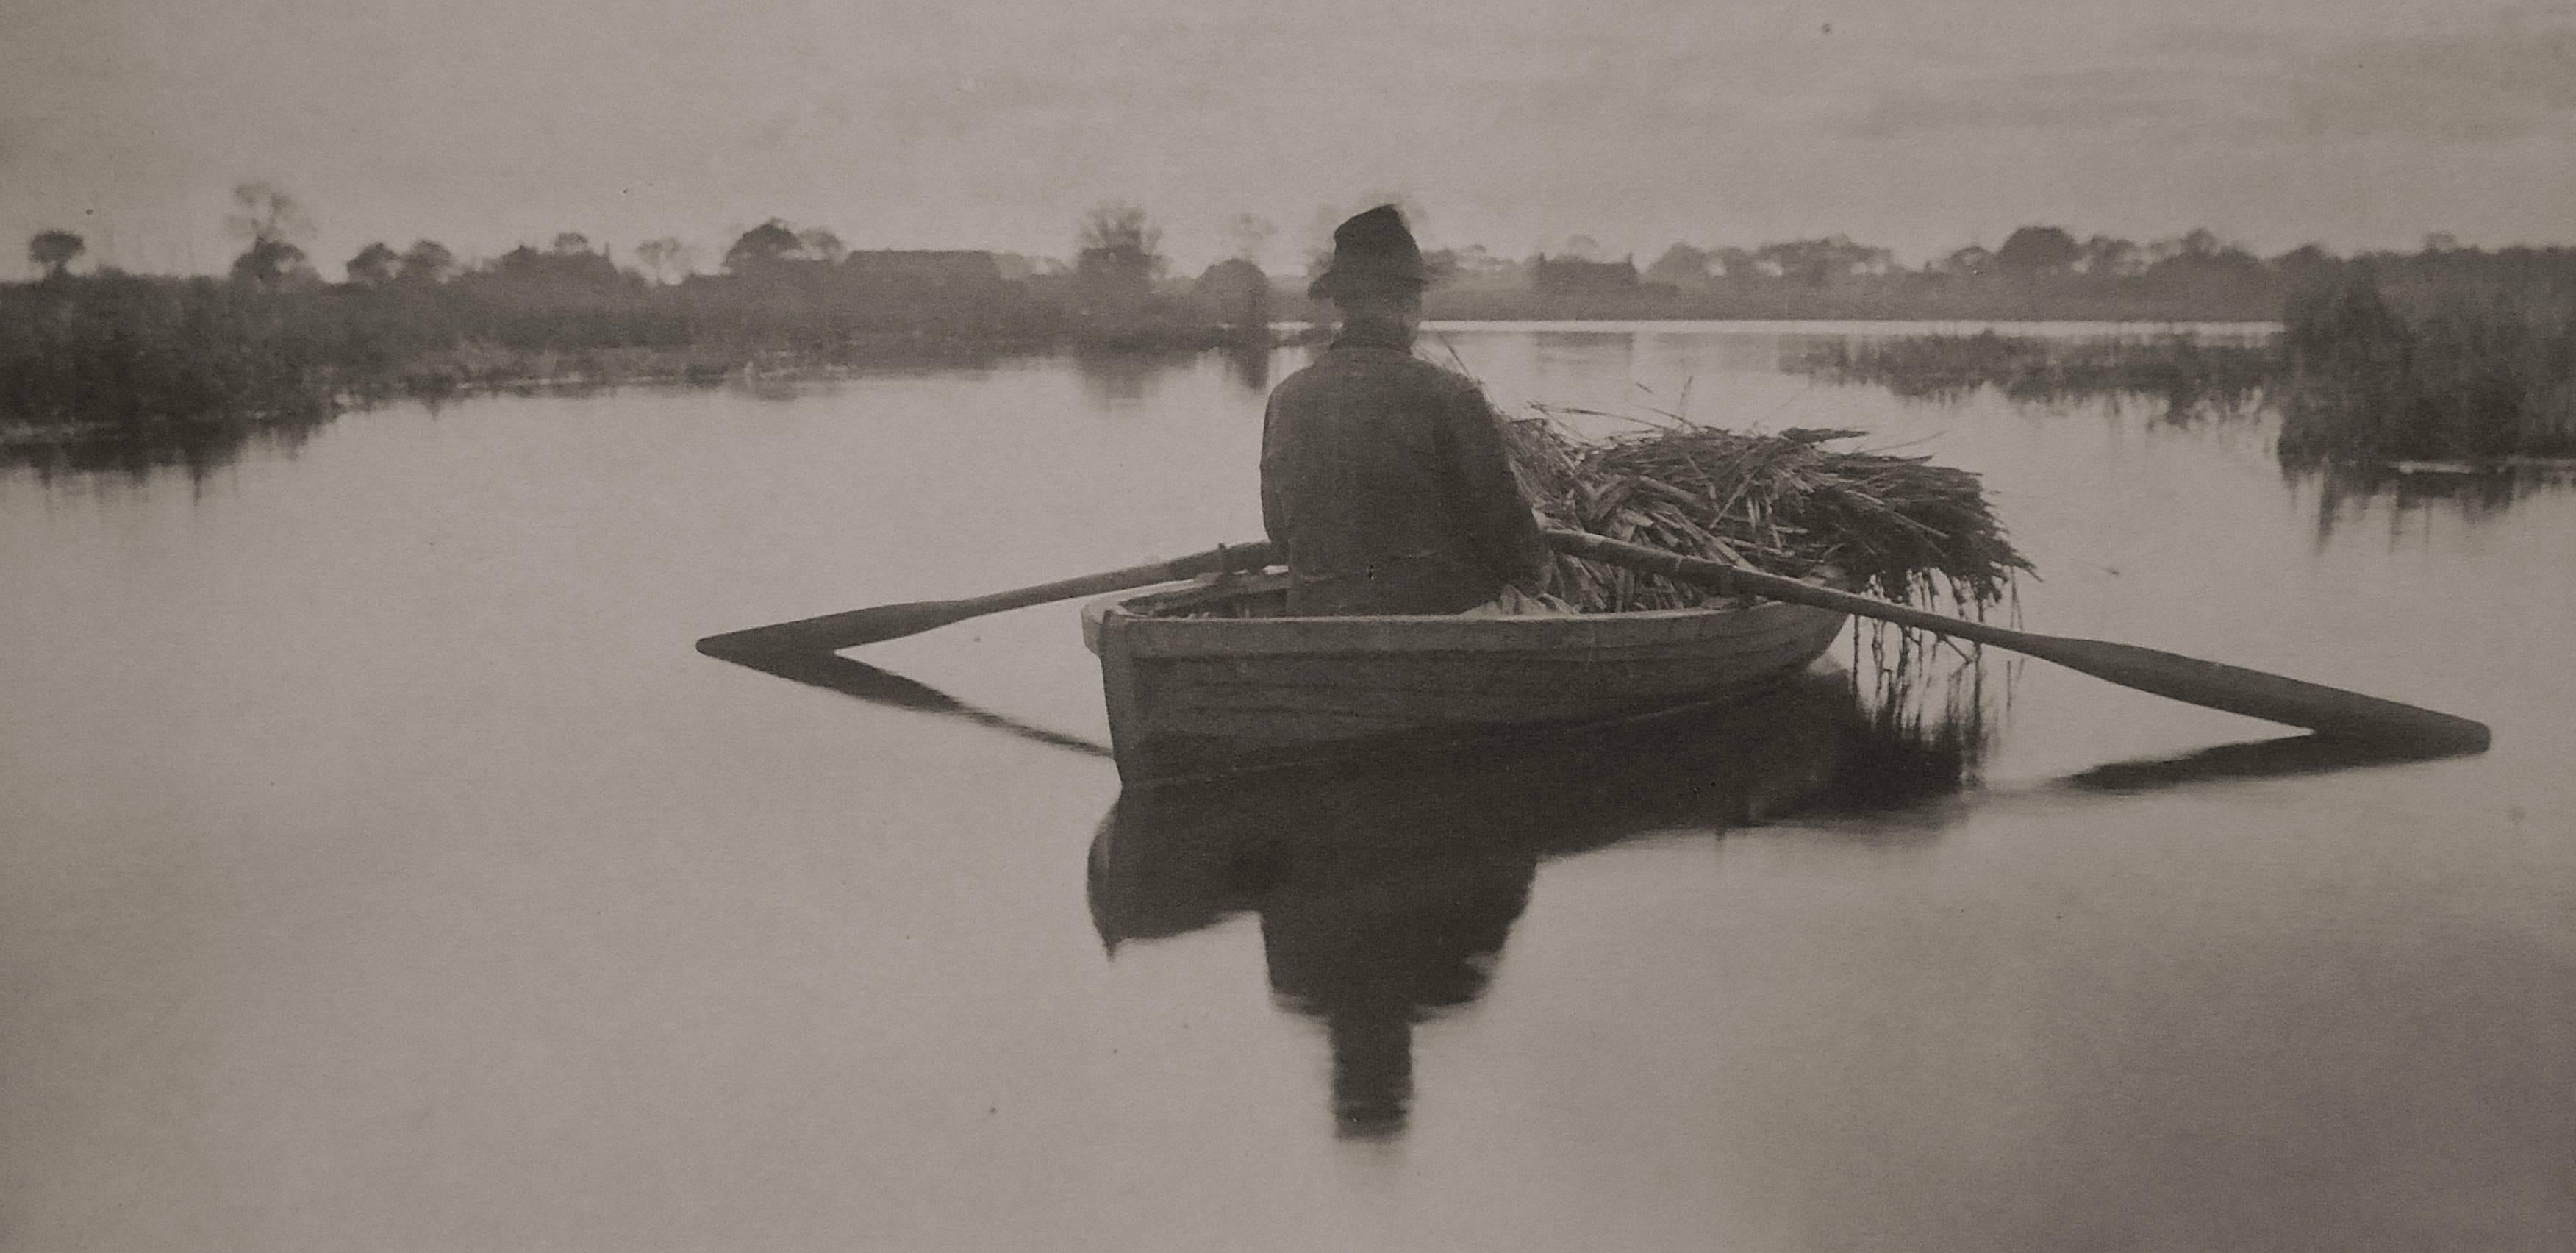 Rowing Home the Schoof-Stuff, Life and Landscape on the Norfolk Broads (Royaume-Uni, Angleterre) - Photograph de P.H. Emerson